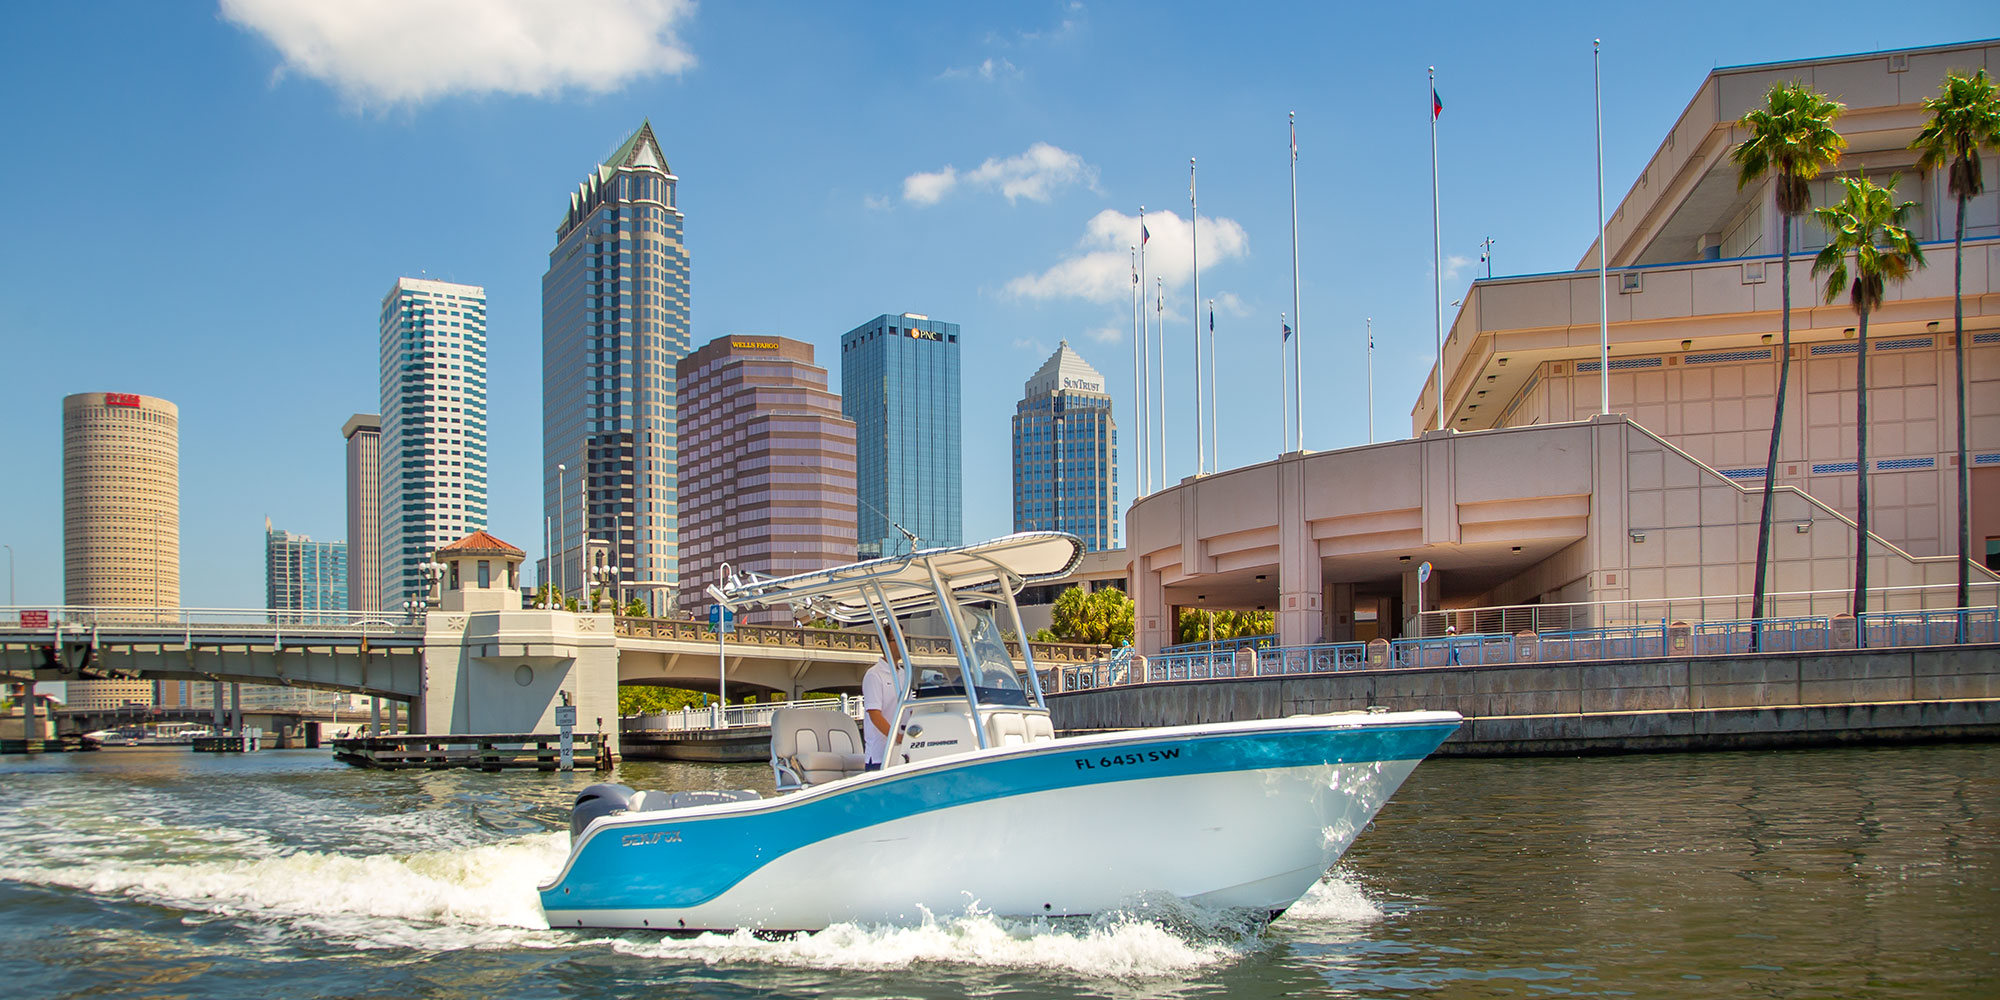 Looking for Adventure? Explore Tampa Bay with Freedom Boat Club